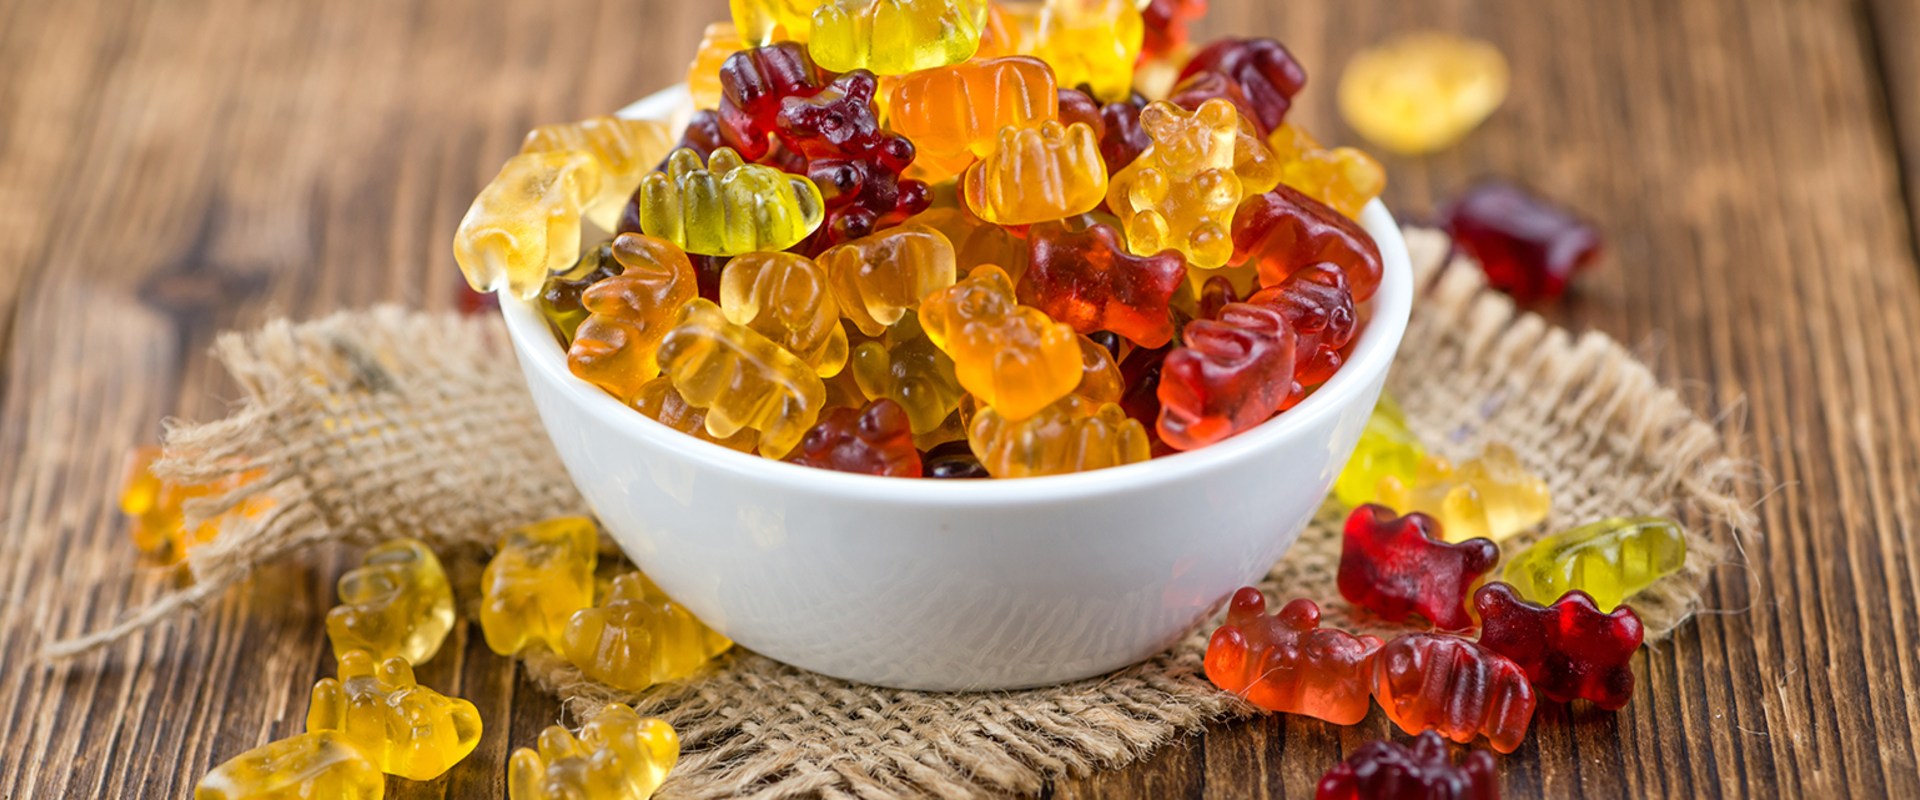 Organic Sweeteners in Gummies: Exploring the Benefits, Uses and Risks